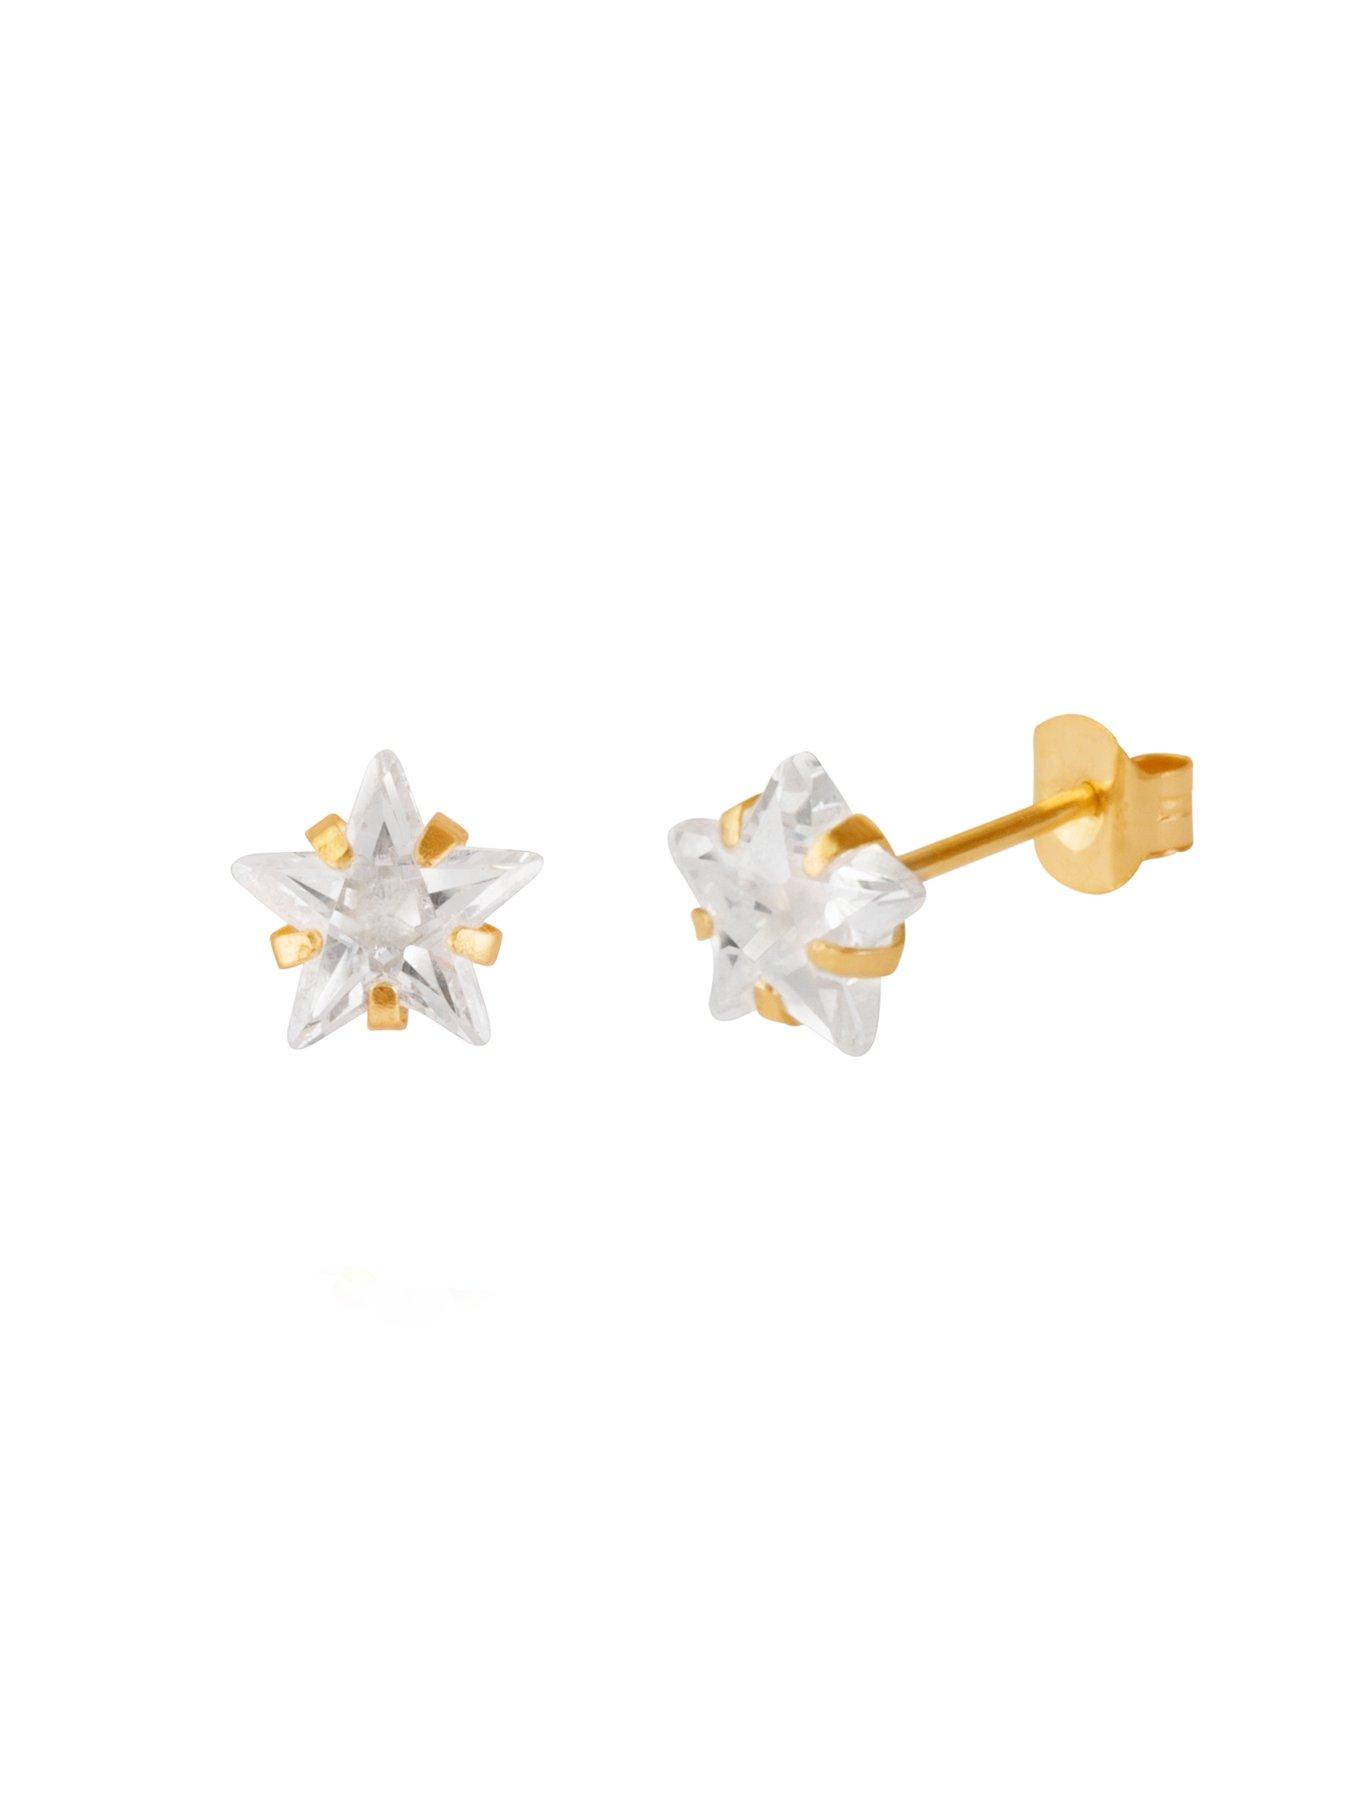 9ct Gold Star Studs 5 Point earrings Gift Boxed Made in UK